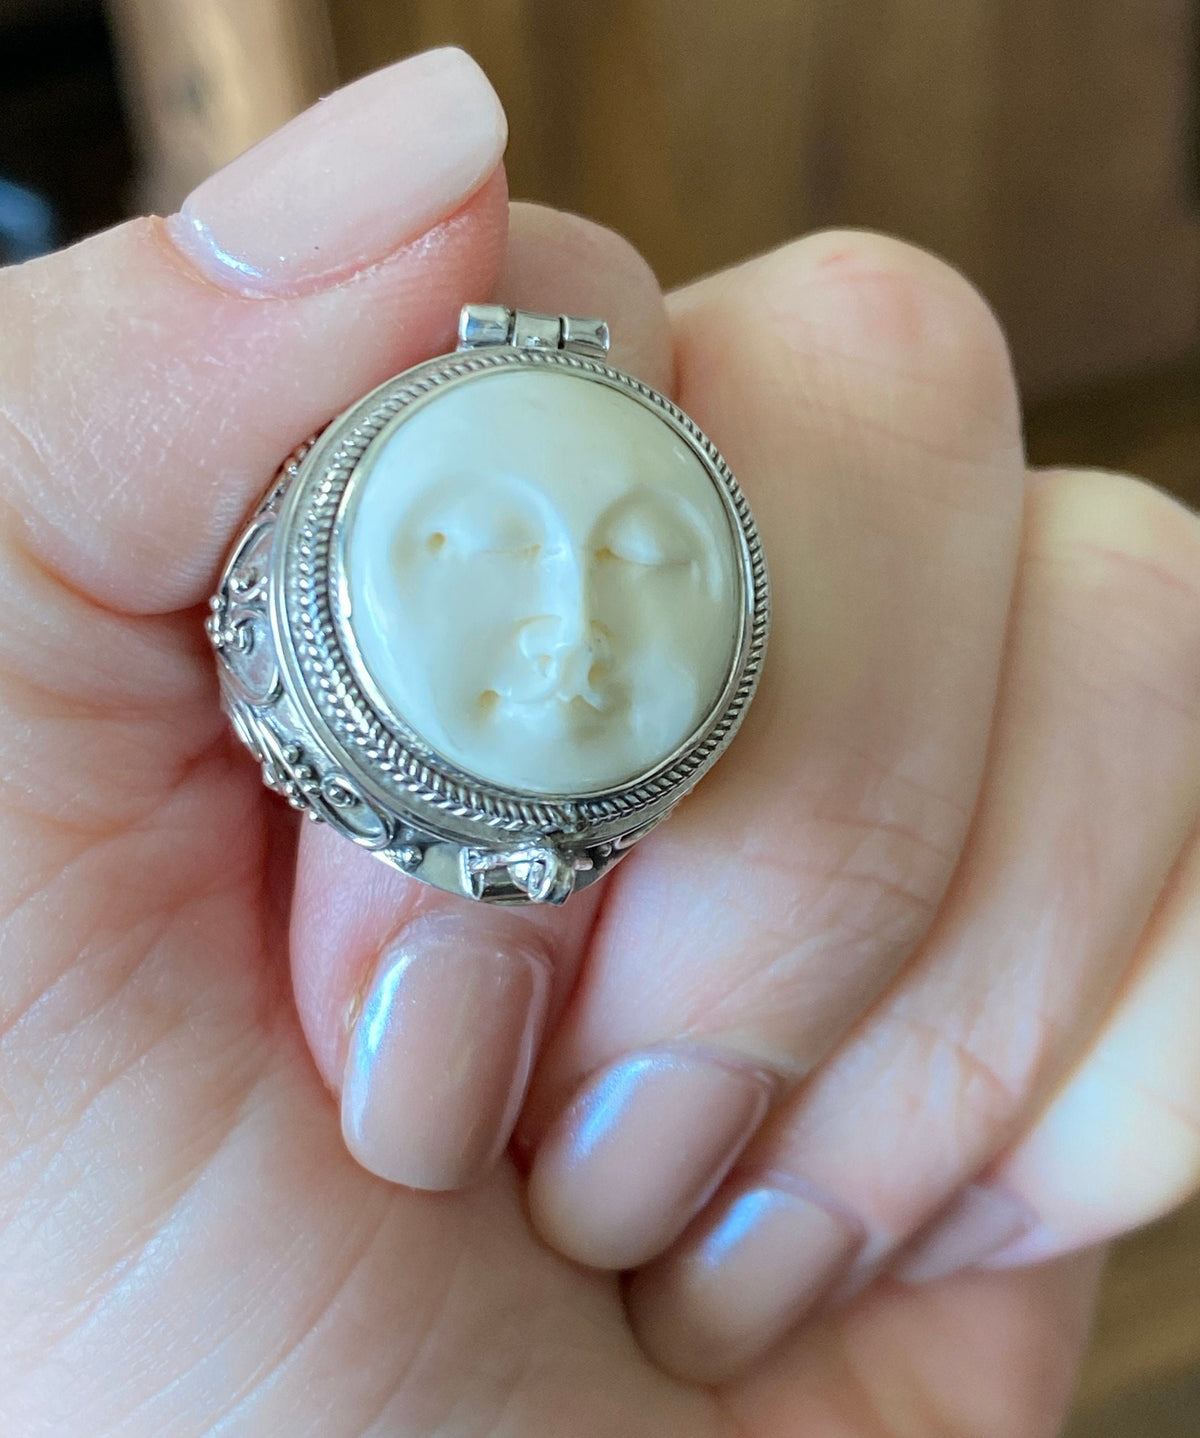 Hand Carved Goddess Moon Face 925 Silver Handmade Locket Poison Ring Large Small or Tiny - Crystal Healing Meditation